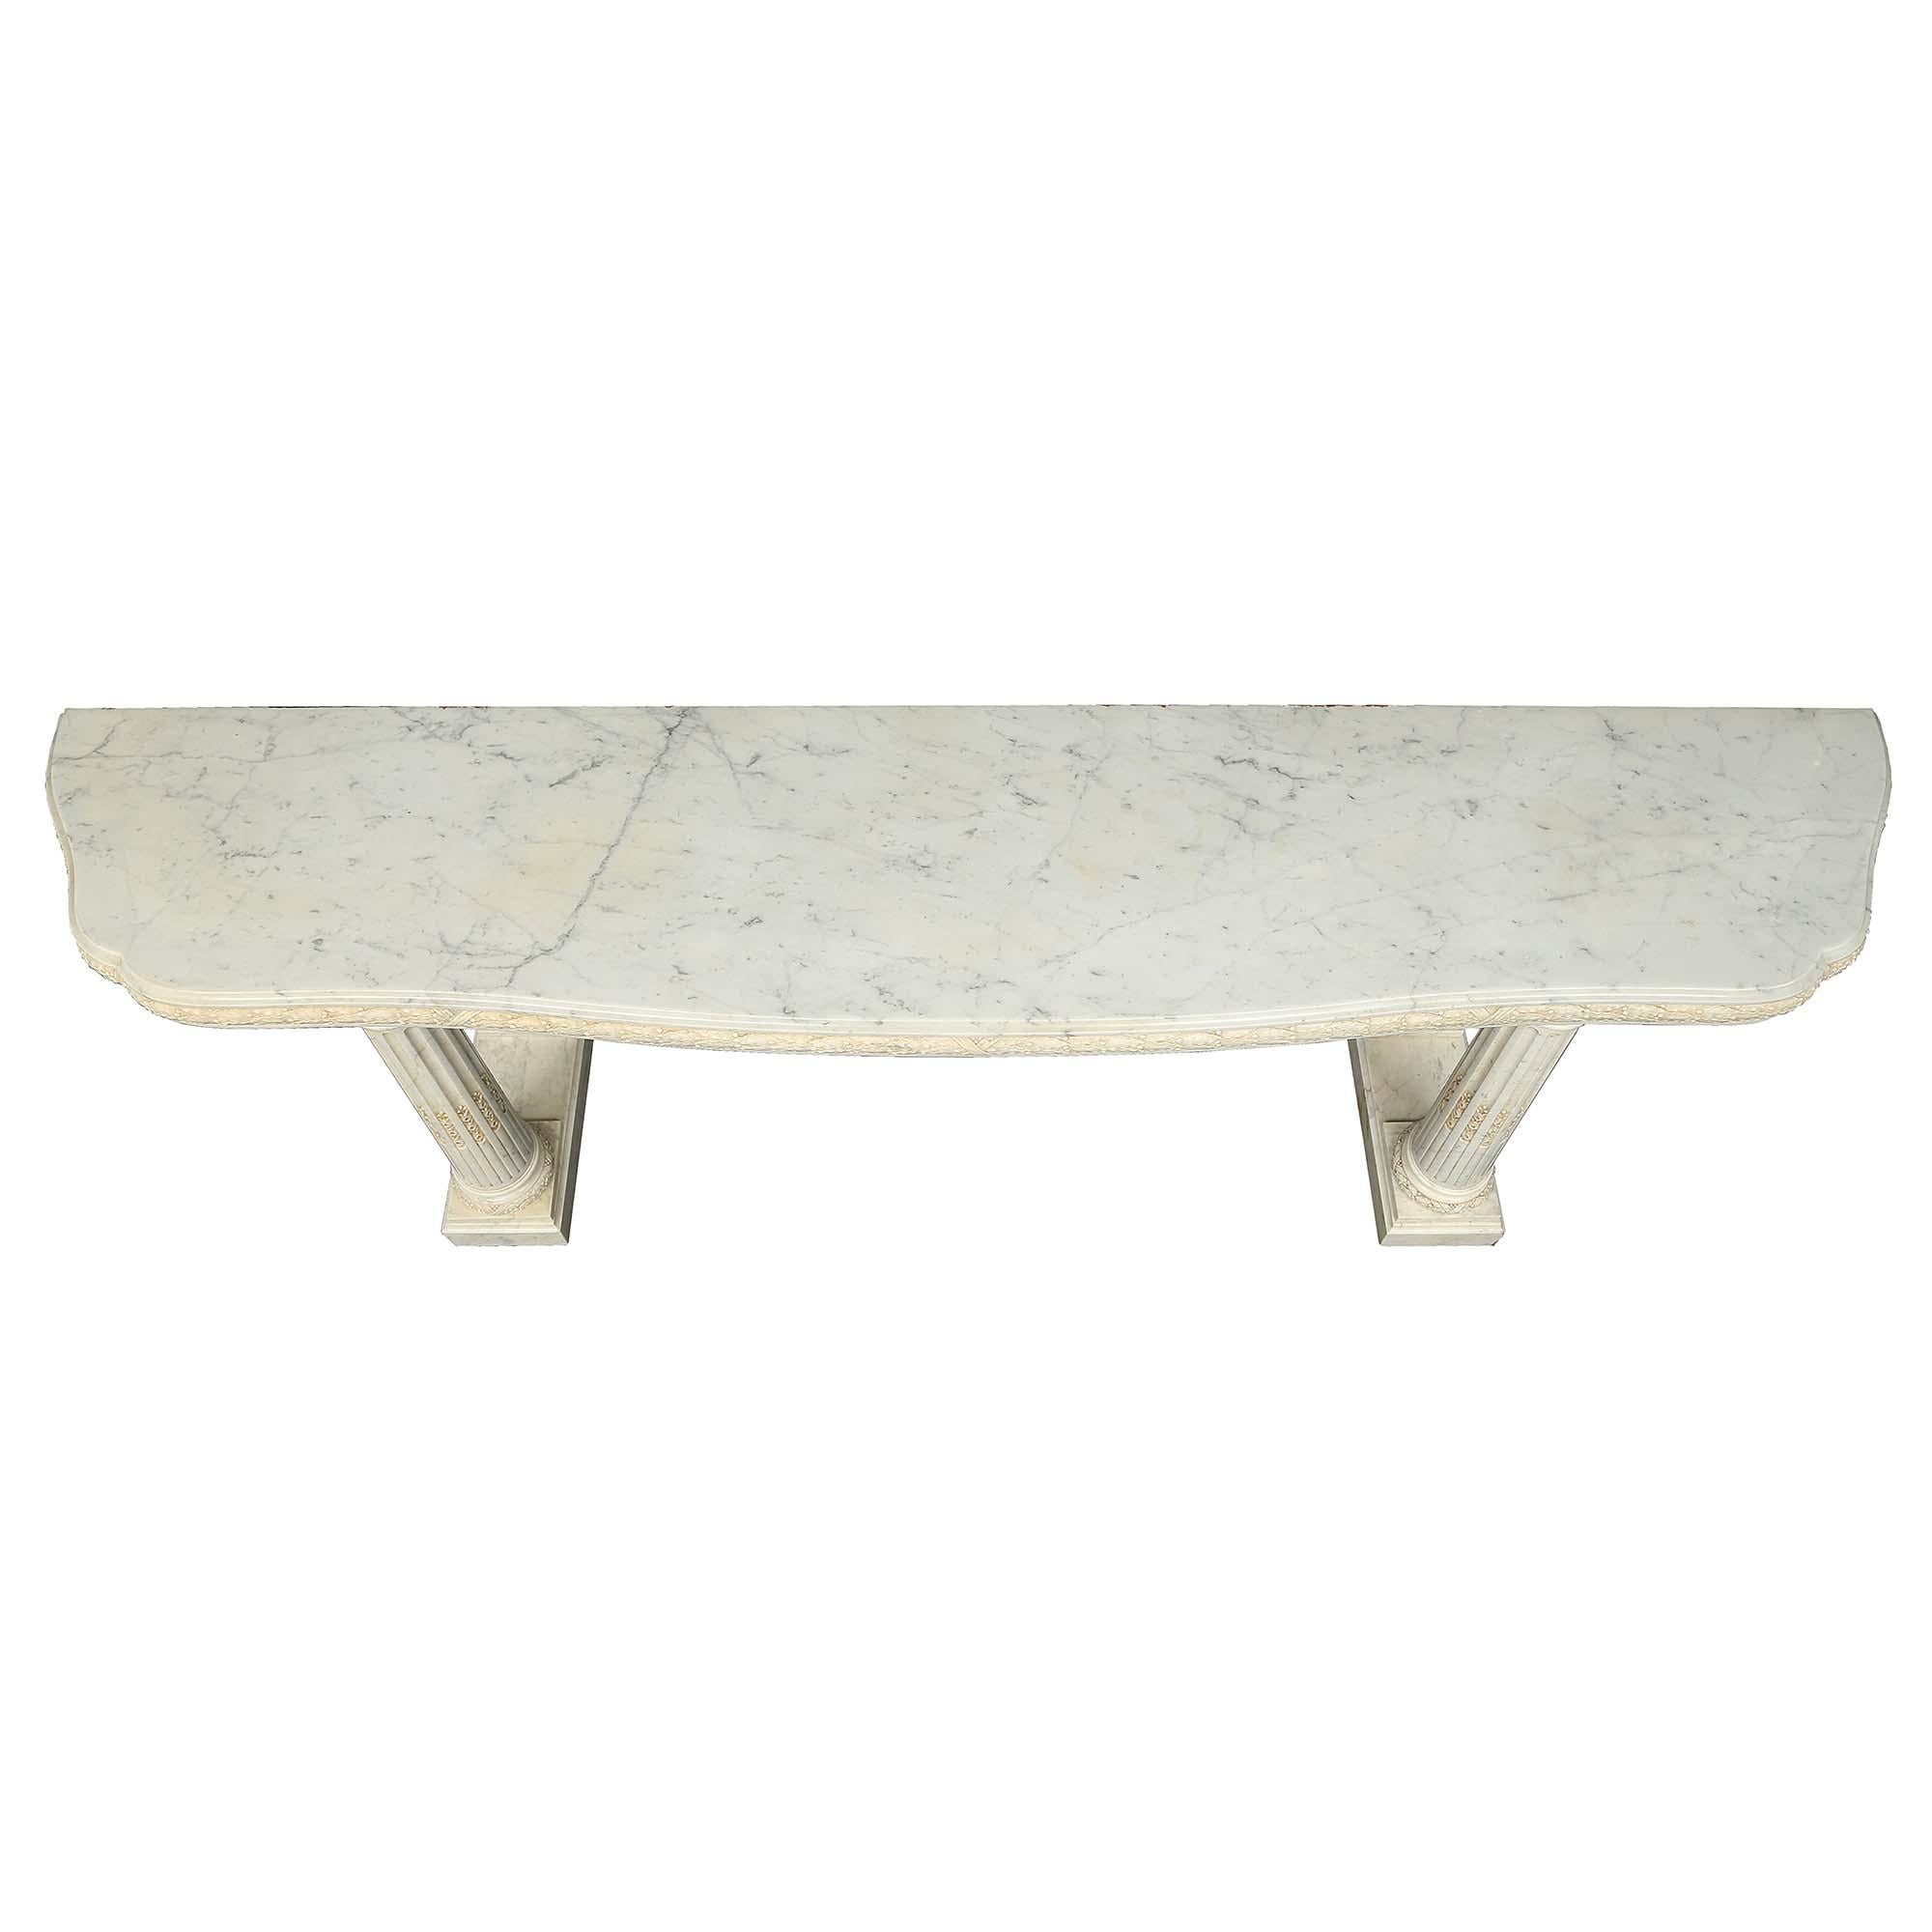 A magnificent Italian late 19th century white Carrara marble console. The console is raised on two rectangular plinths with four impressive fluted columns, with laurel tied wreath bases, finely carved foliate chandelles, and Les Oves designed top